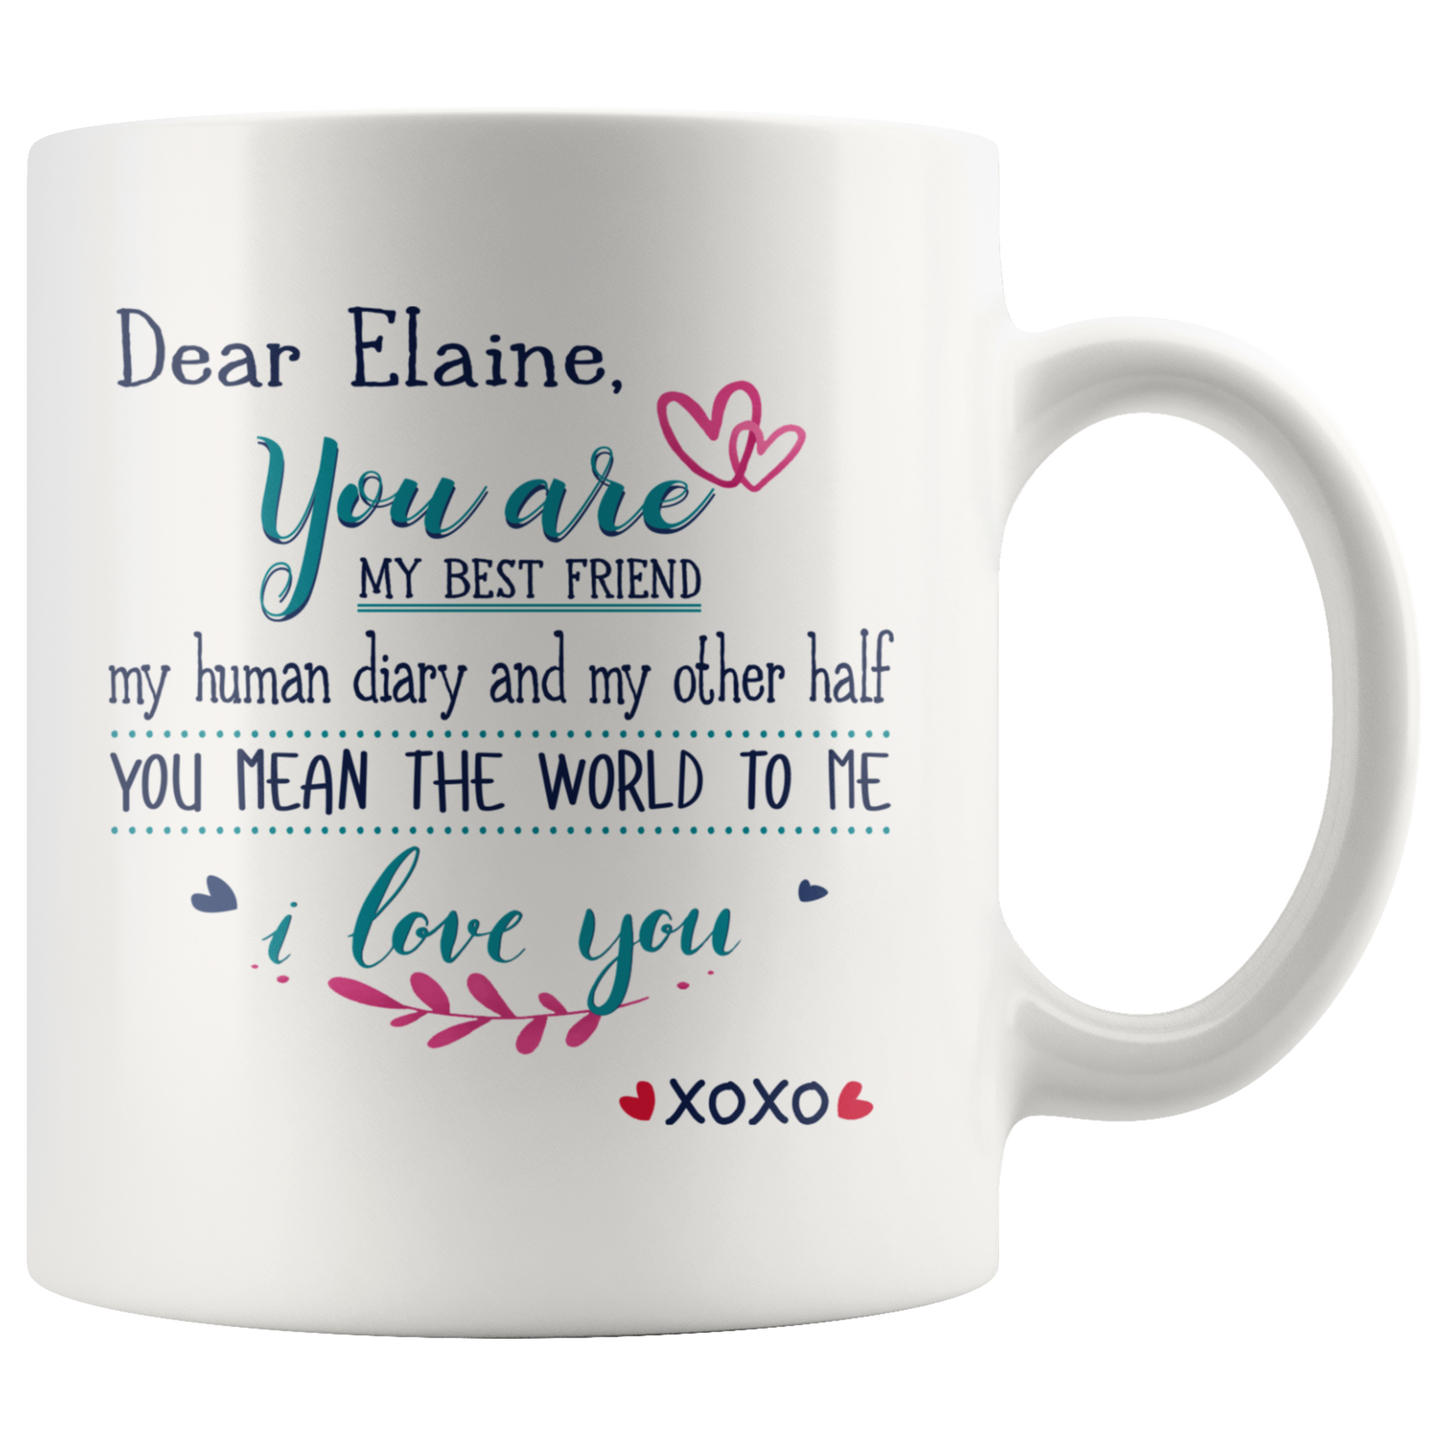 ND20451706-sp-23007 - Christmas Gifts For Wife From Husband Mug XoXo 11 oz - Dear